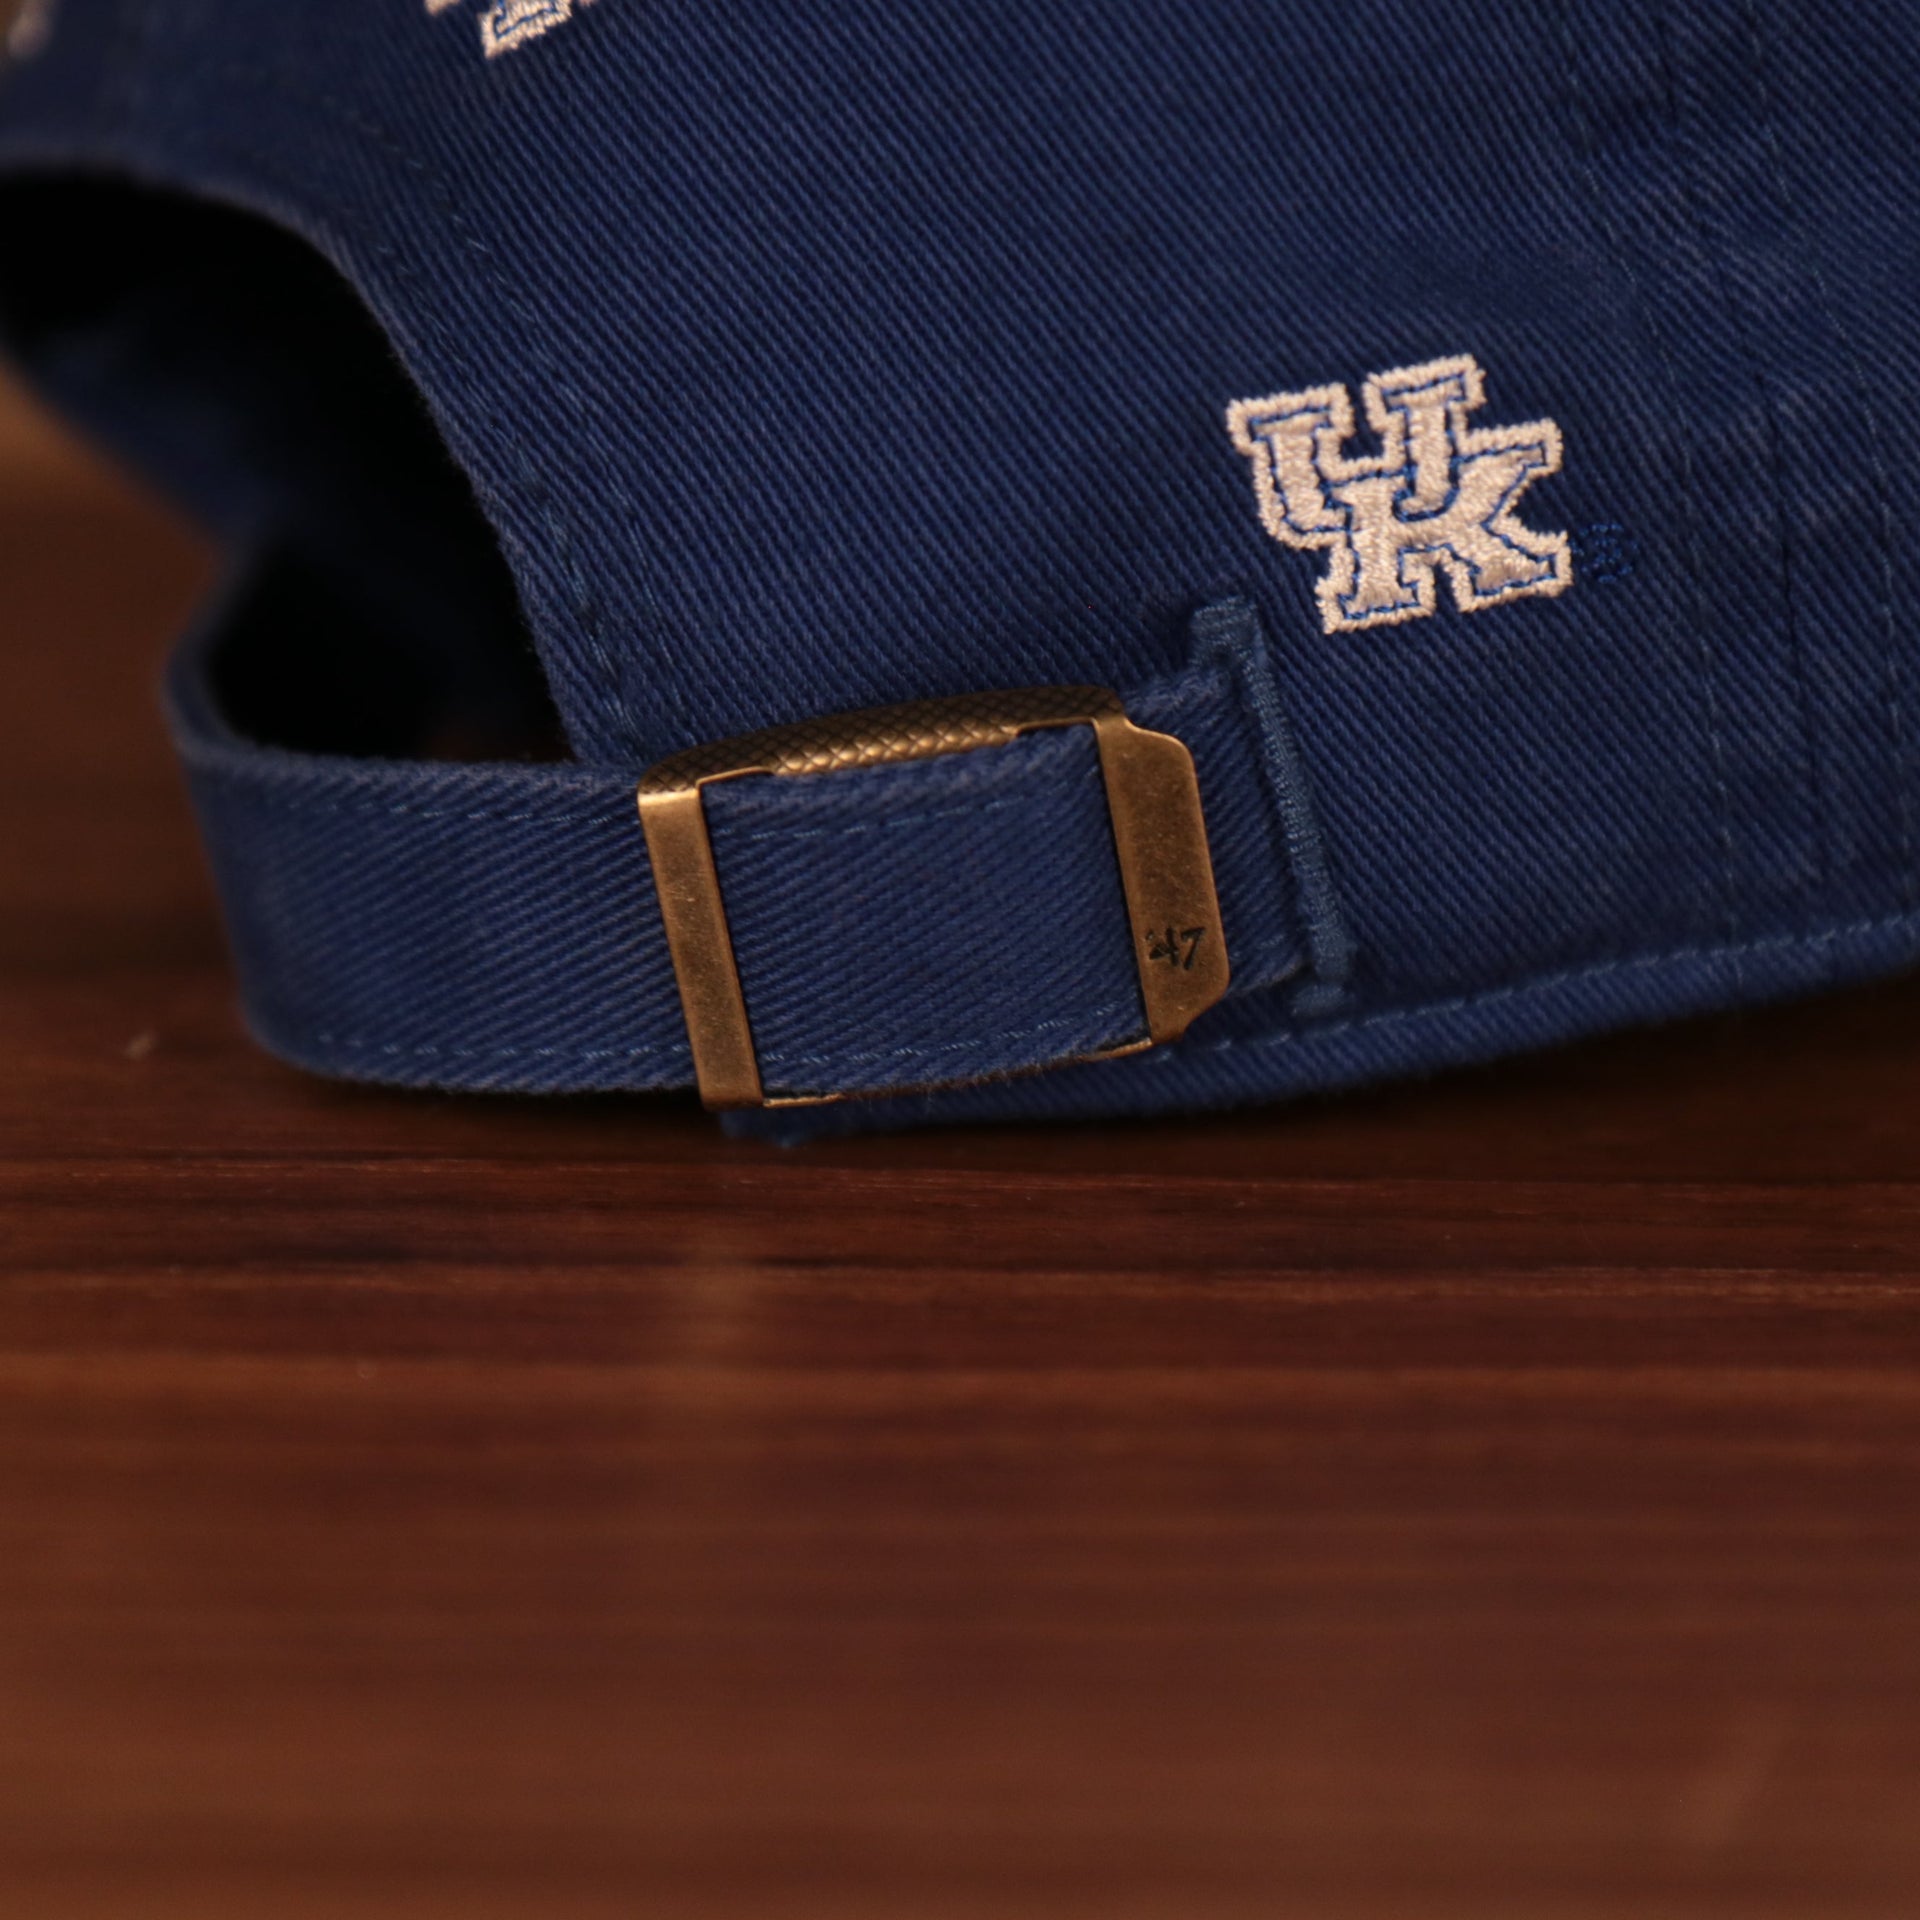 adjustable strap on the back of the University of Kentucky Wildcats All Over Logo Patch Blue Adjustable Dad Hat